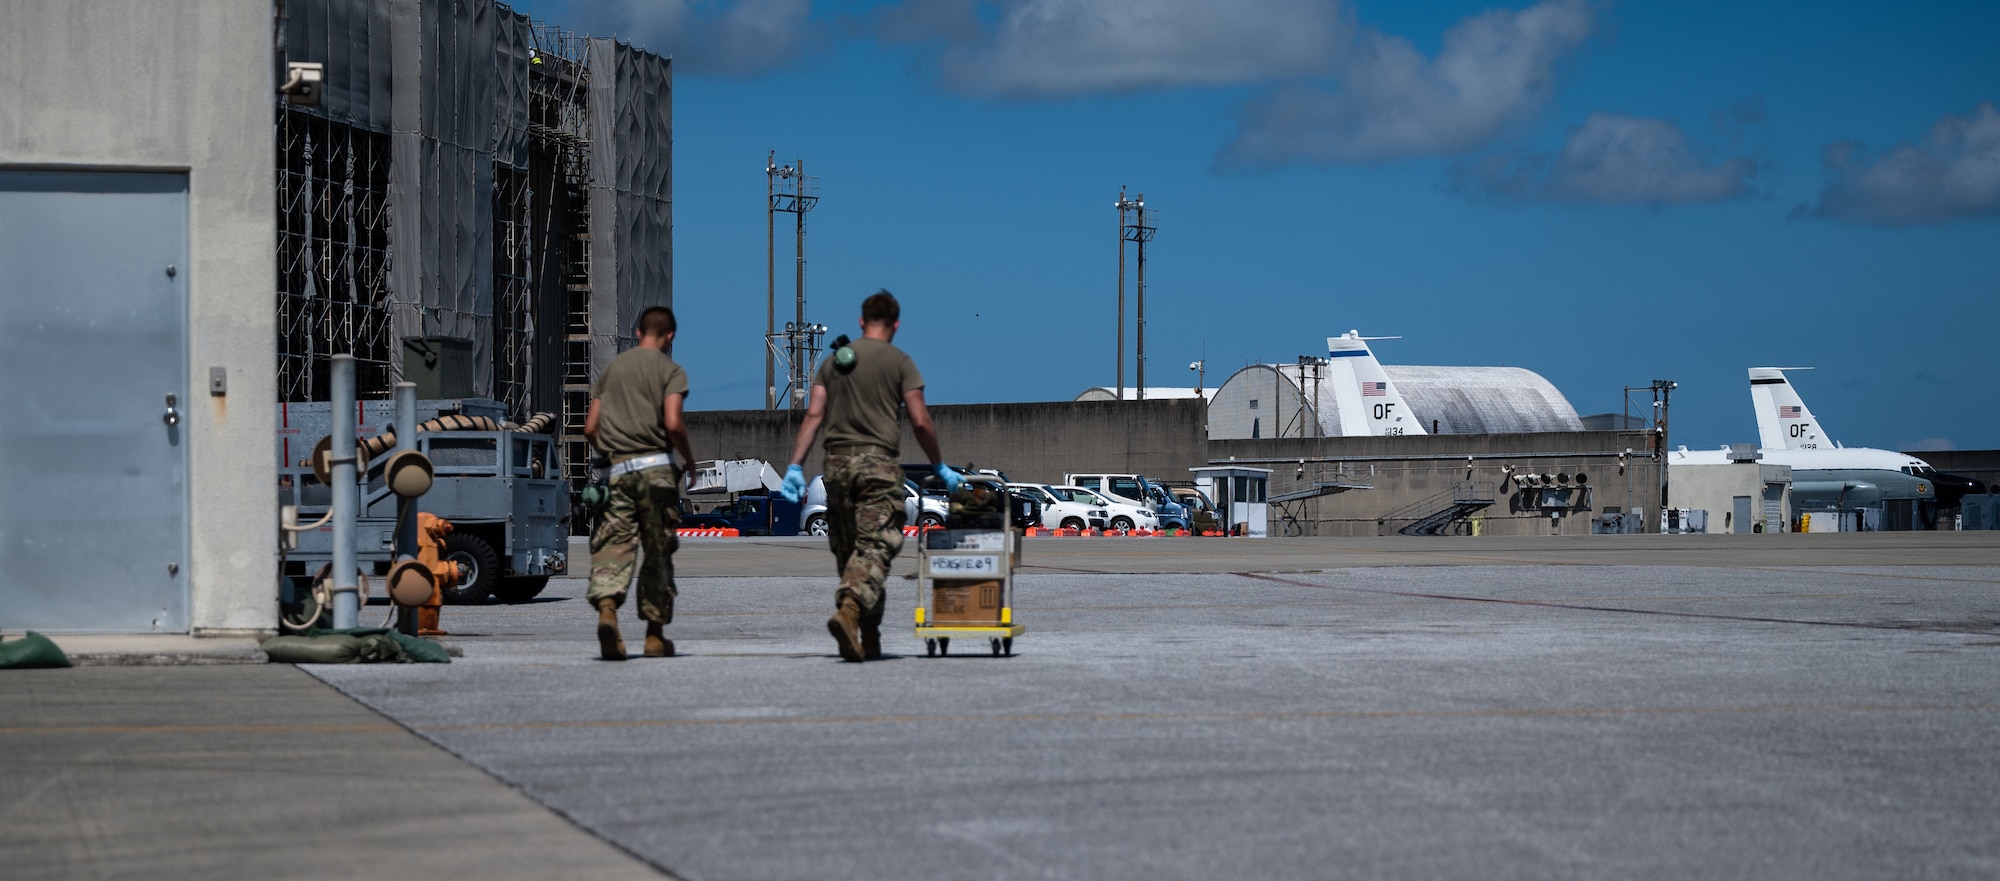 U.S. Air Force Airman 1st Class Trevor Fisher, left, 961st Aircraft Maintenance Unit aerospace propulsion apprentice, and Airman 1st Class Andrew Foust, right, 961st AMU aerospace propulsion apprentice, walk back to the 961st AMU at Kadena Air Base, Japan, Aug. 30, 2021. The 961st AMU works around the clock to ensure E-3 Sentries remain mission ready to defend and support the U.S. and coalition partners. (U.S. Air Force photo by Airman 1st Class Stephen Pulter)